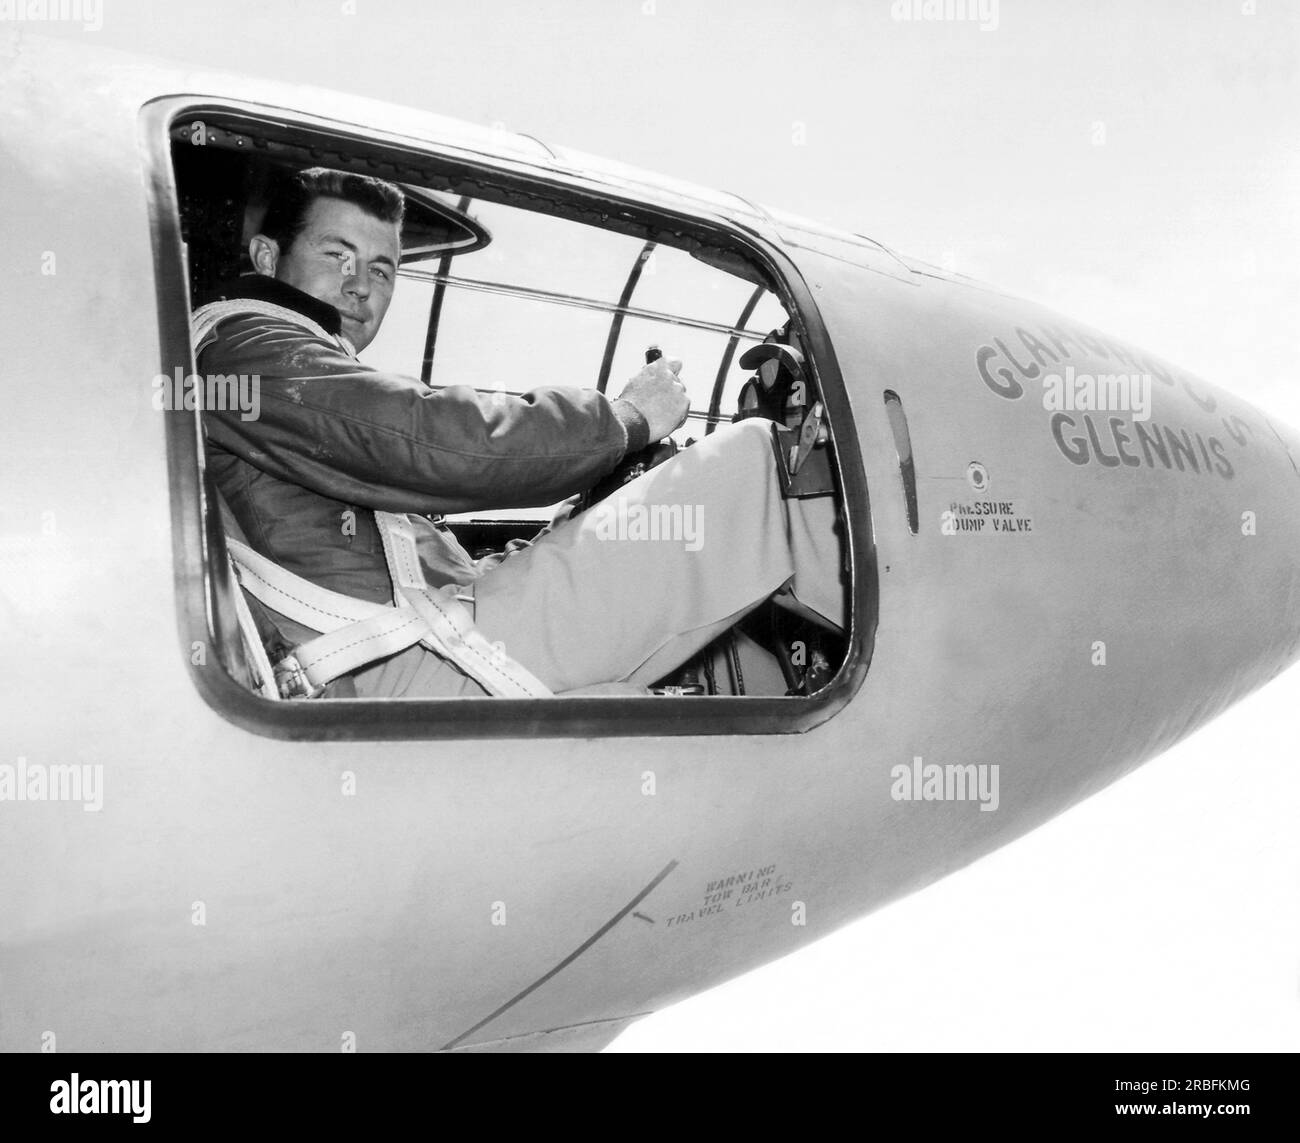 Muroc Army Air Force Base, California:  October, 1947 Capt. Charles E. Yeager is in the cockpit of the Bell X-1 supersonic research aircraft. He became the first man to fly faster than the speed of sound in level flight on October 14. Stock Photo